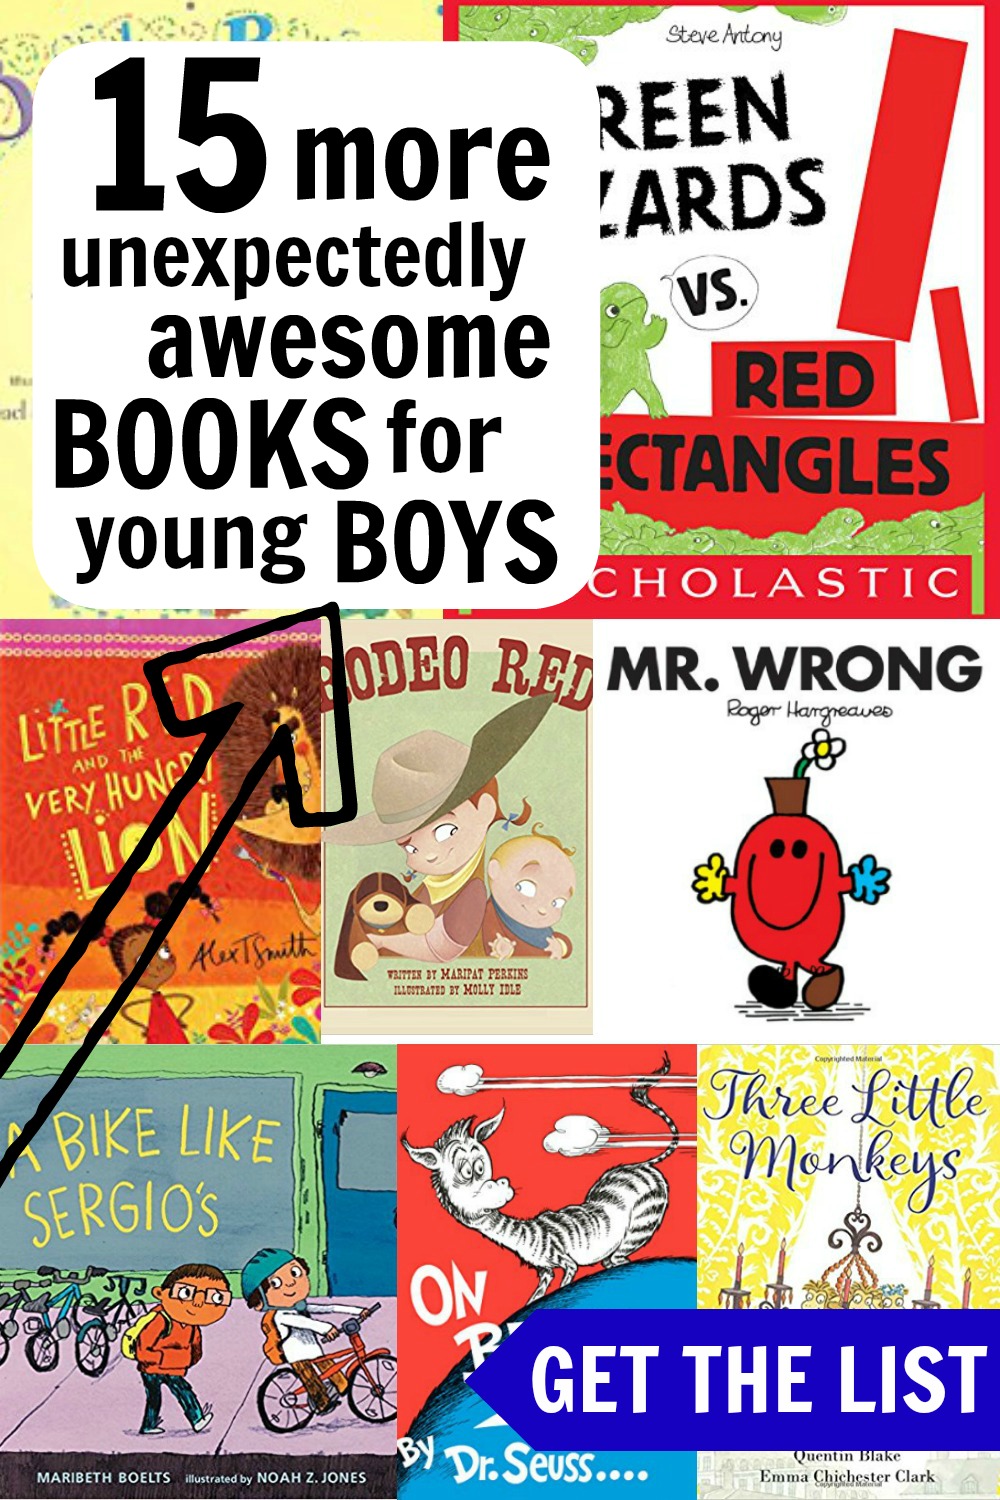 15 More Unexpectedly Awesome Books for Boys | This Simple Balance